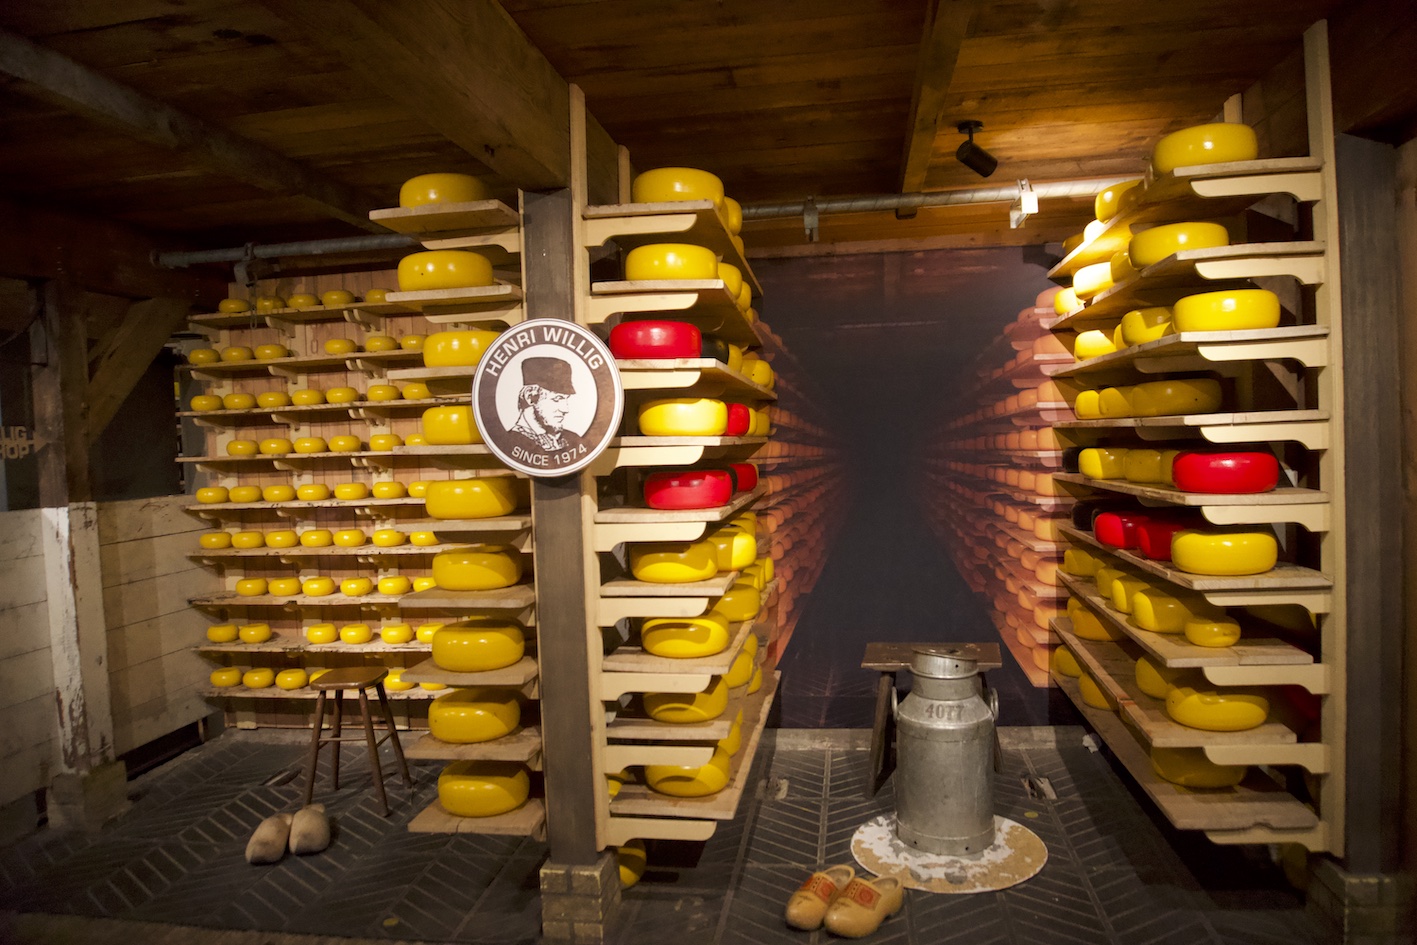 Some shelves with lots of cheese at the Henri Willig cheese factory in Zaanse Schans